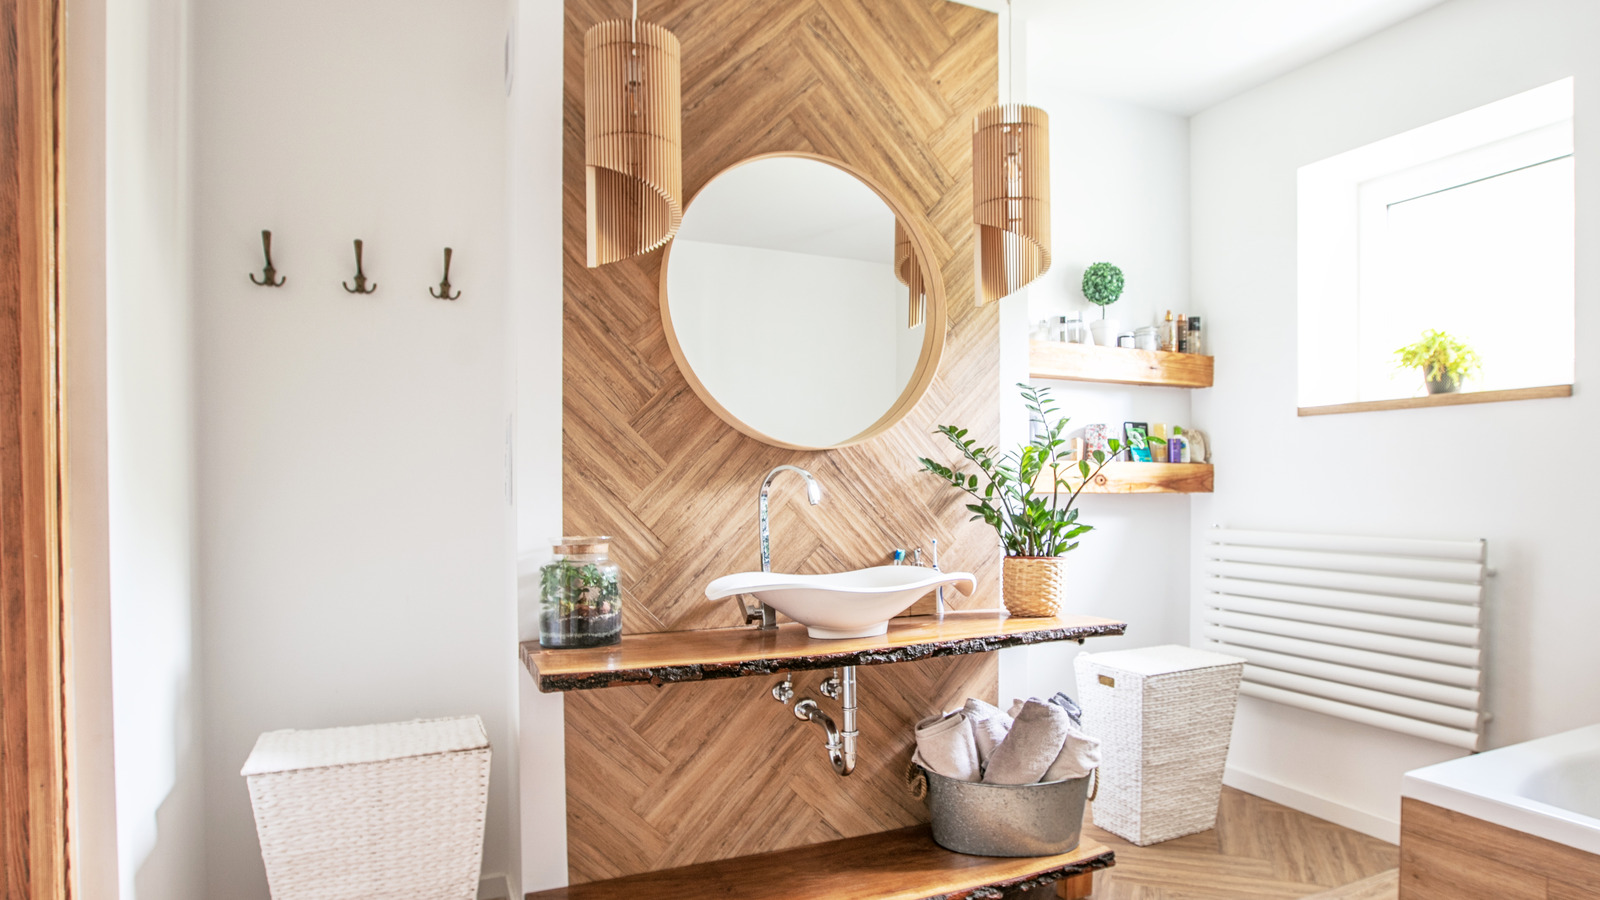 Can a spa bathroom at home really be practical?